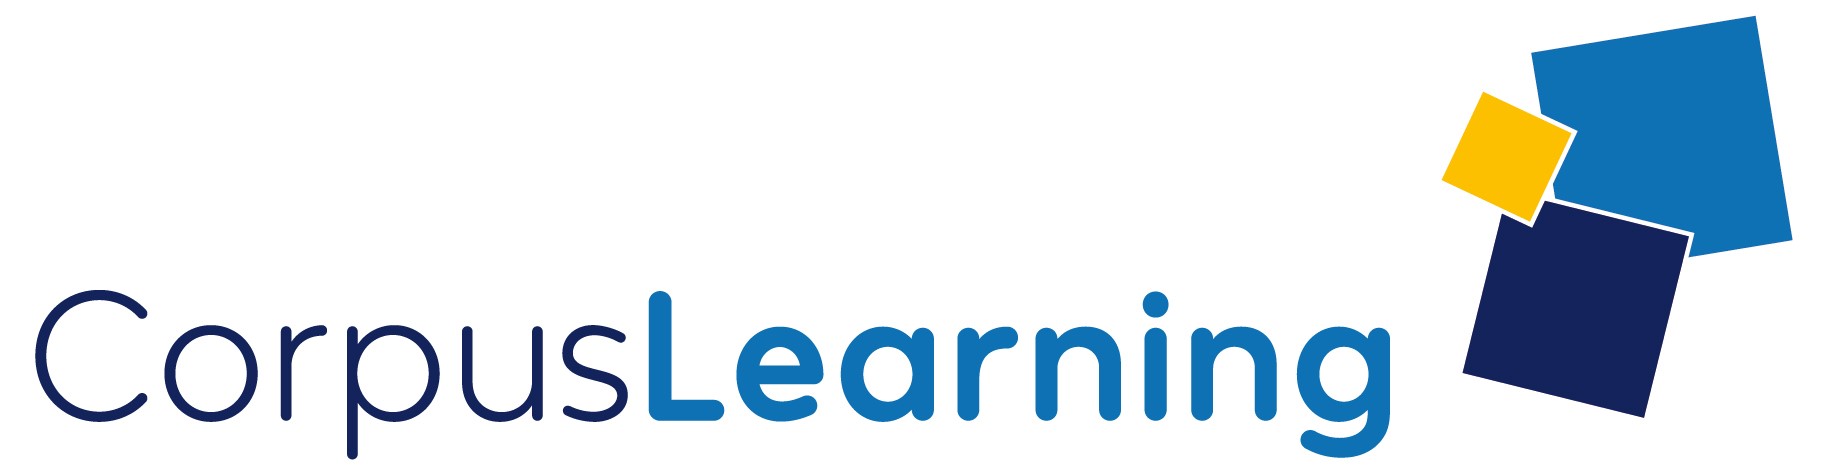 Campus Learning Logo